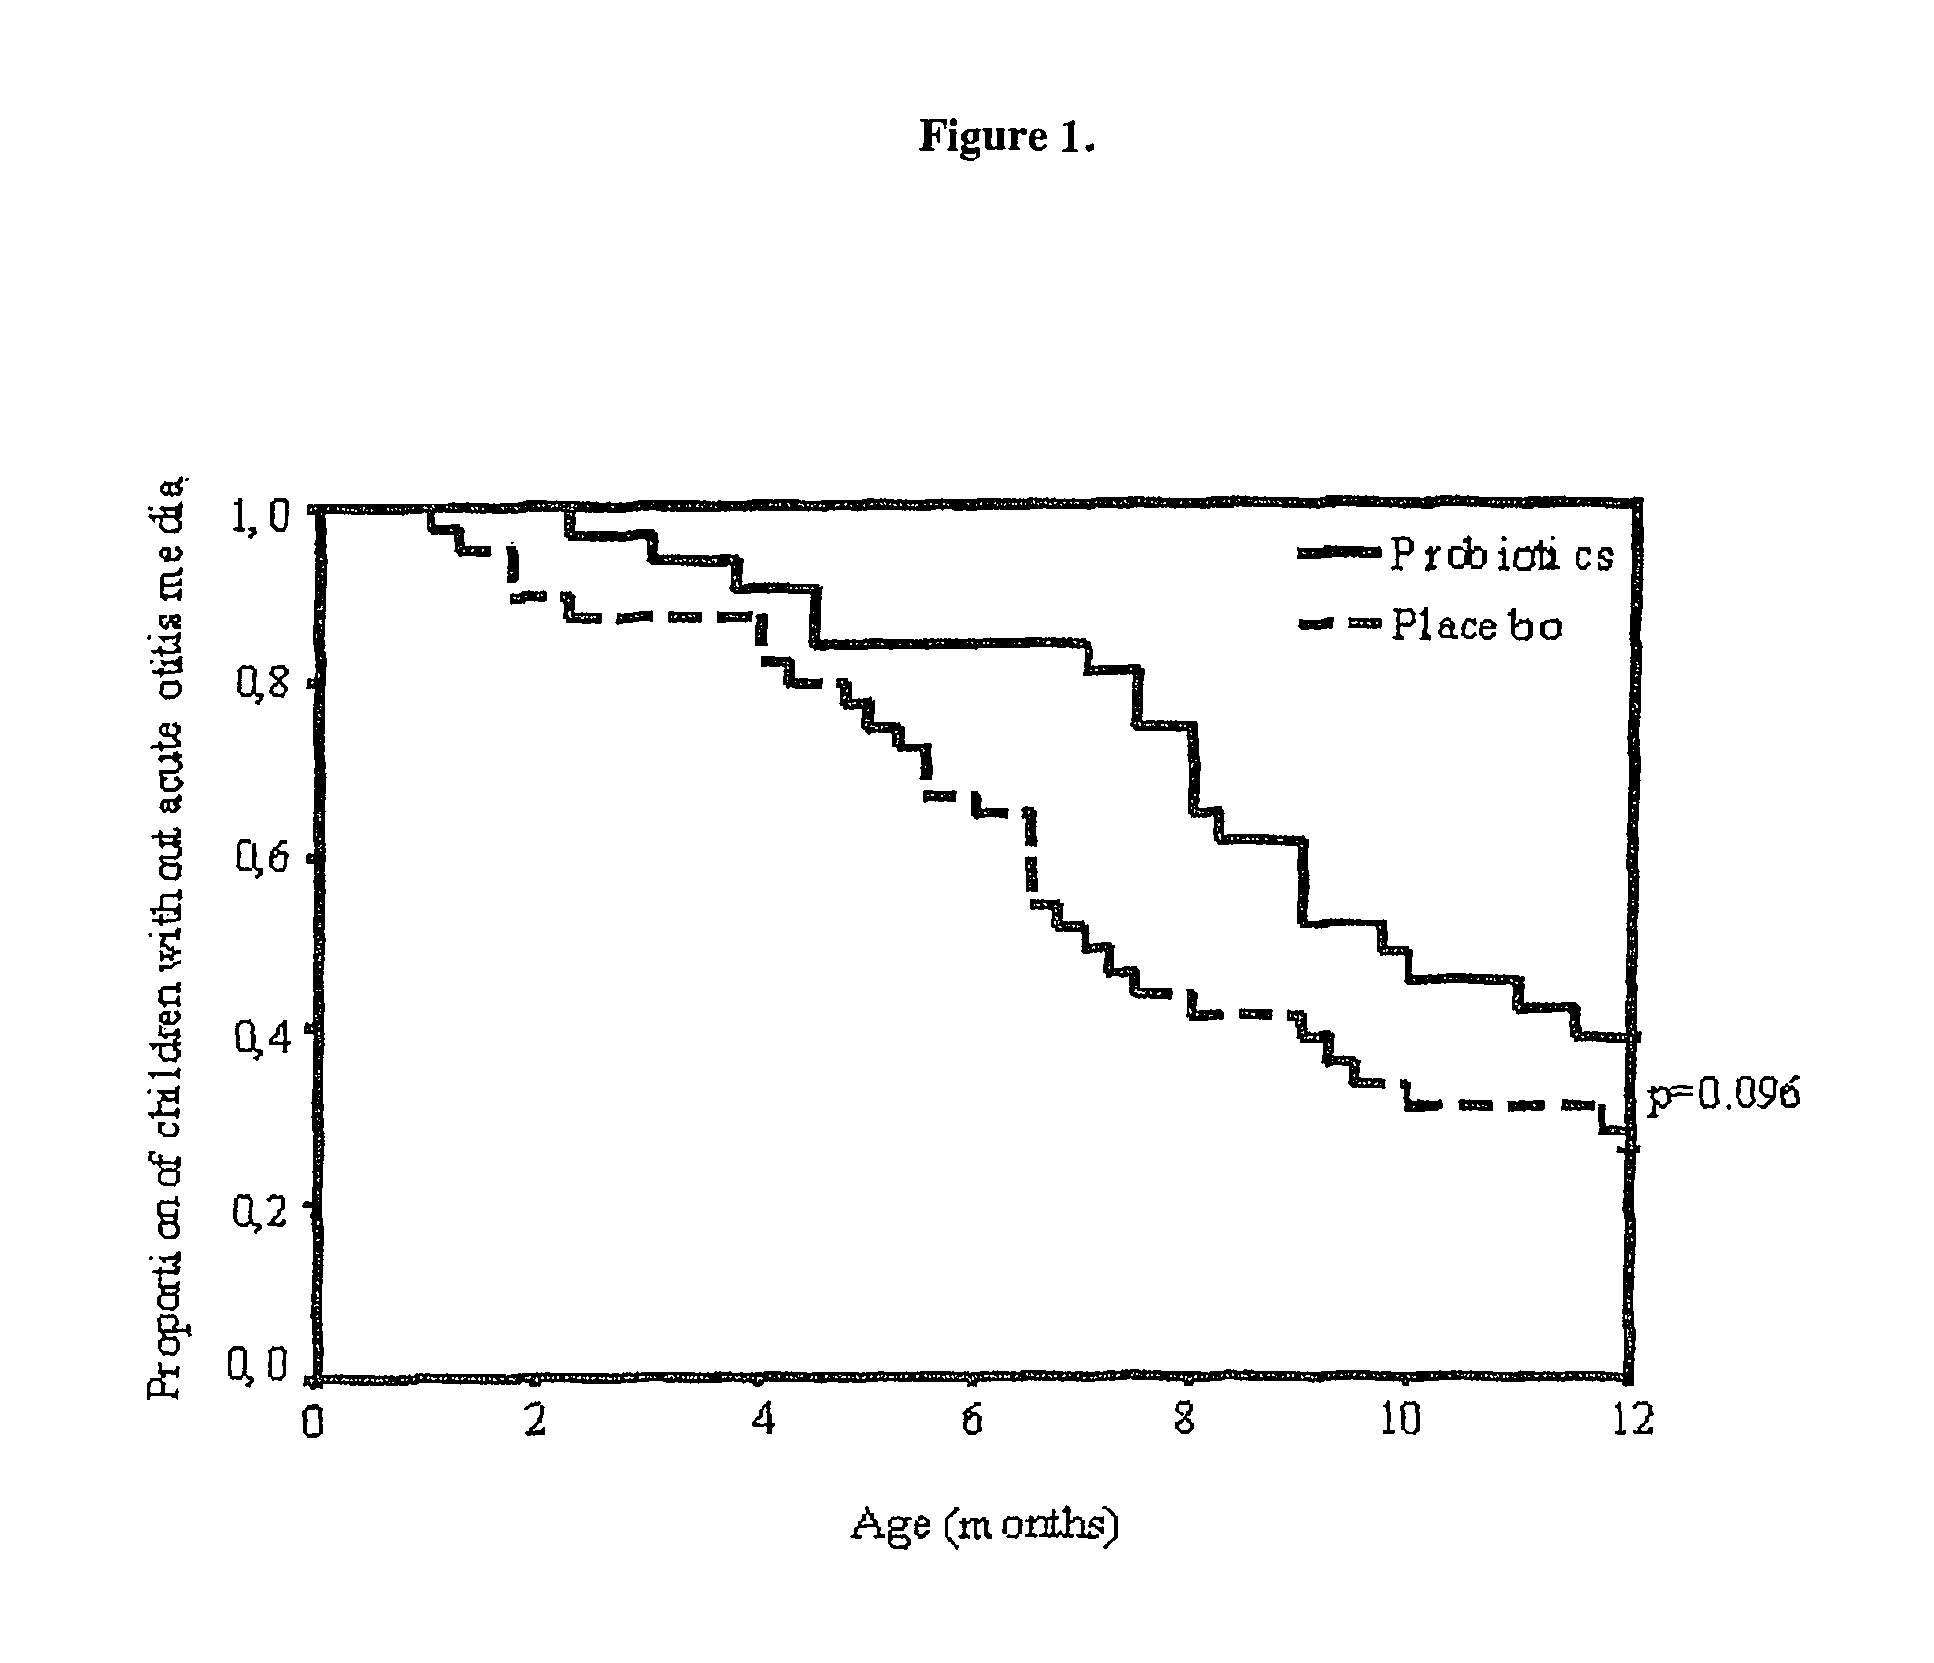 Method for preventing or treating respiratory infections and acute otitis media in infants using <i>Lactobacillus rhamnosus </i>LGG and <i>Bifidobacterium lactis </i>Bb-12